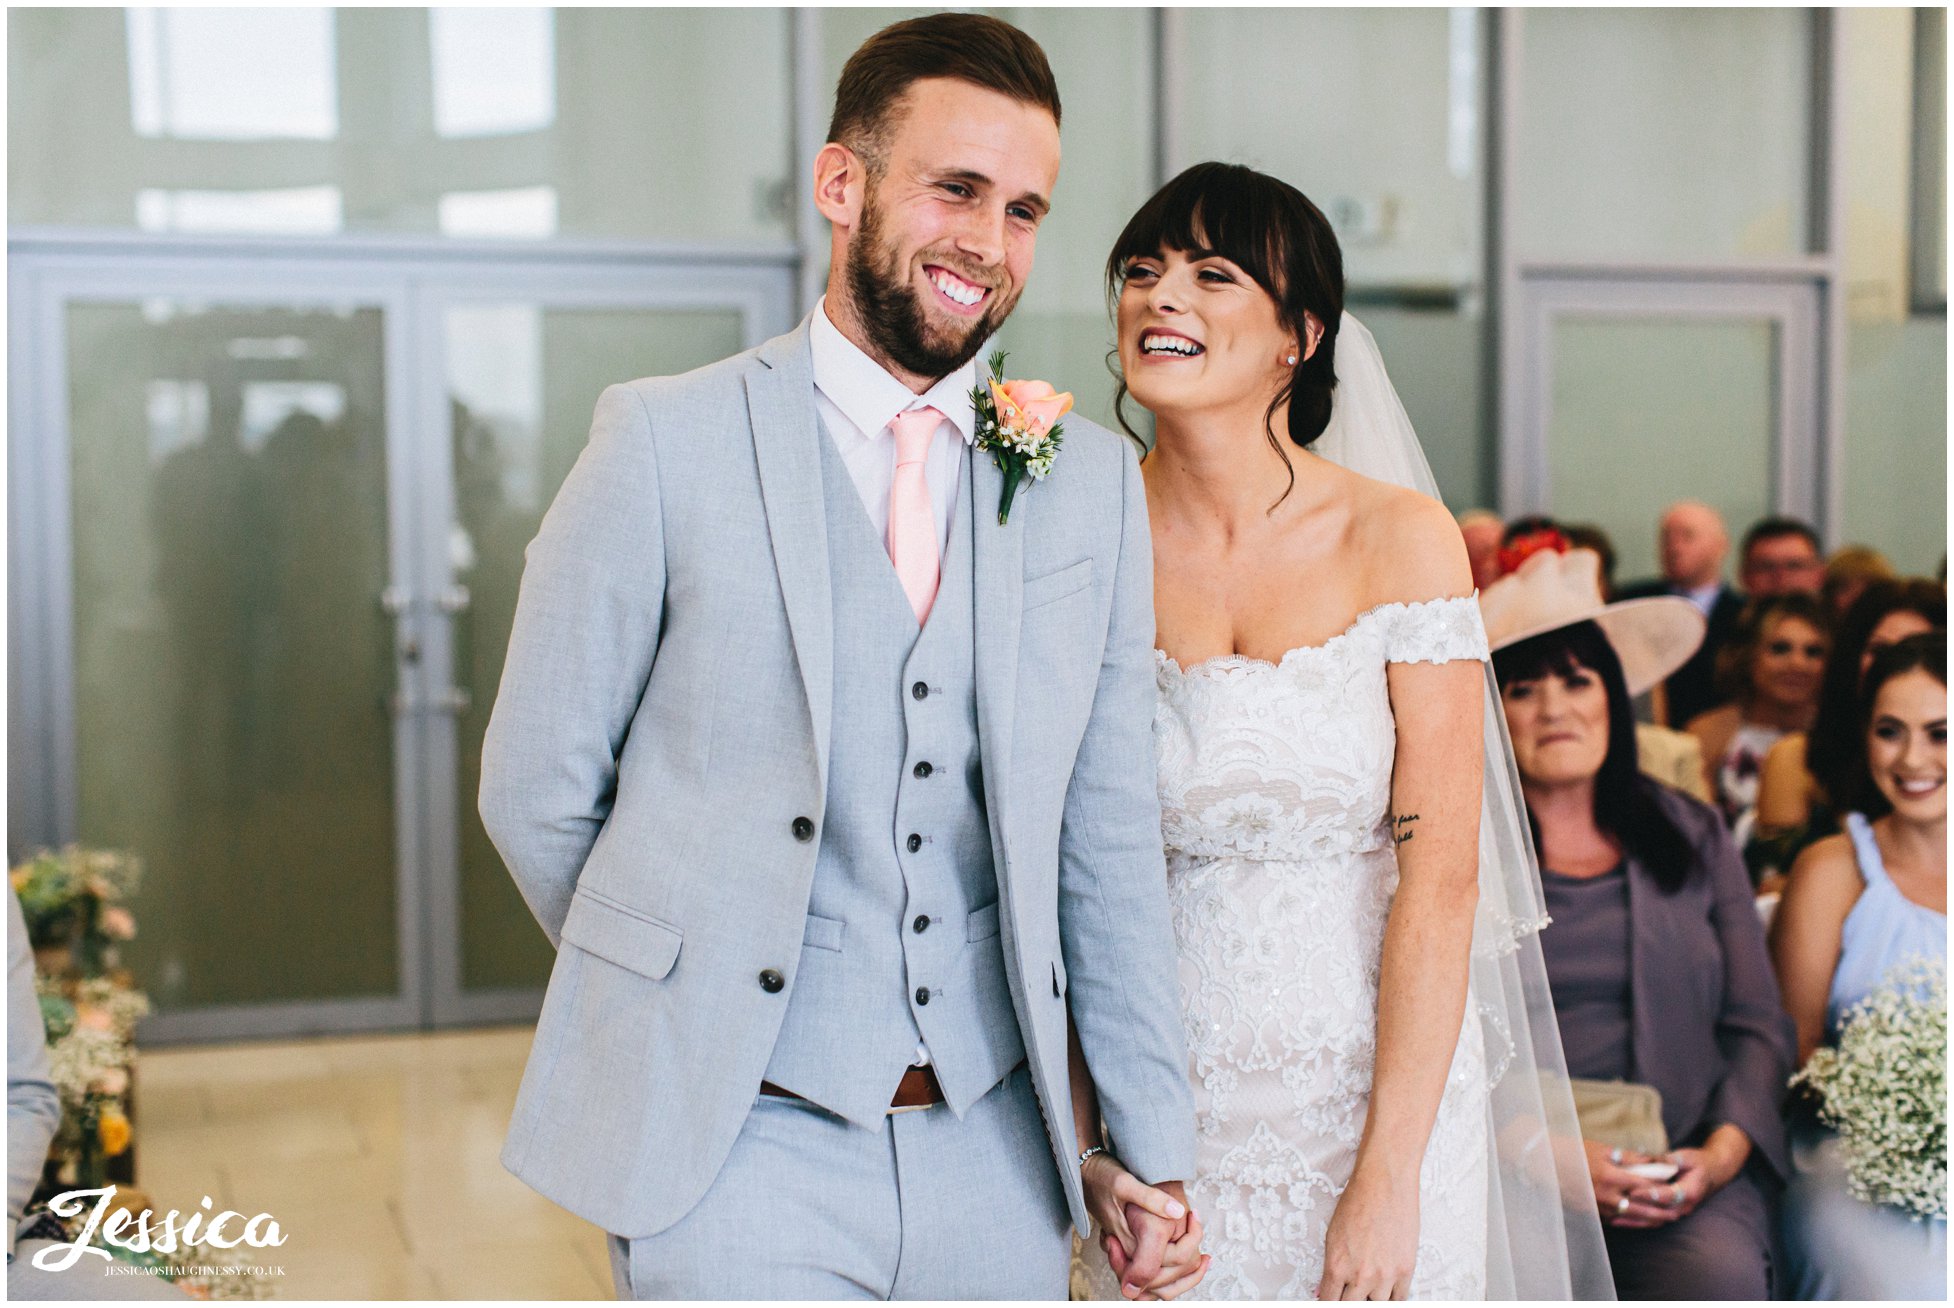 the couple laugh together during their liverpool wedding